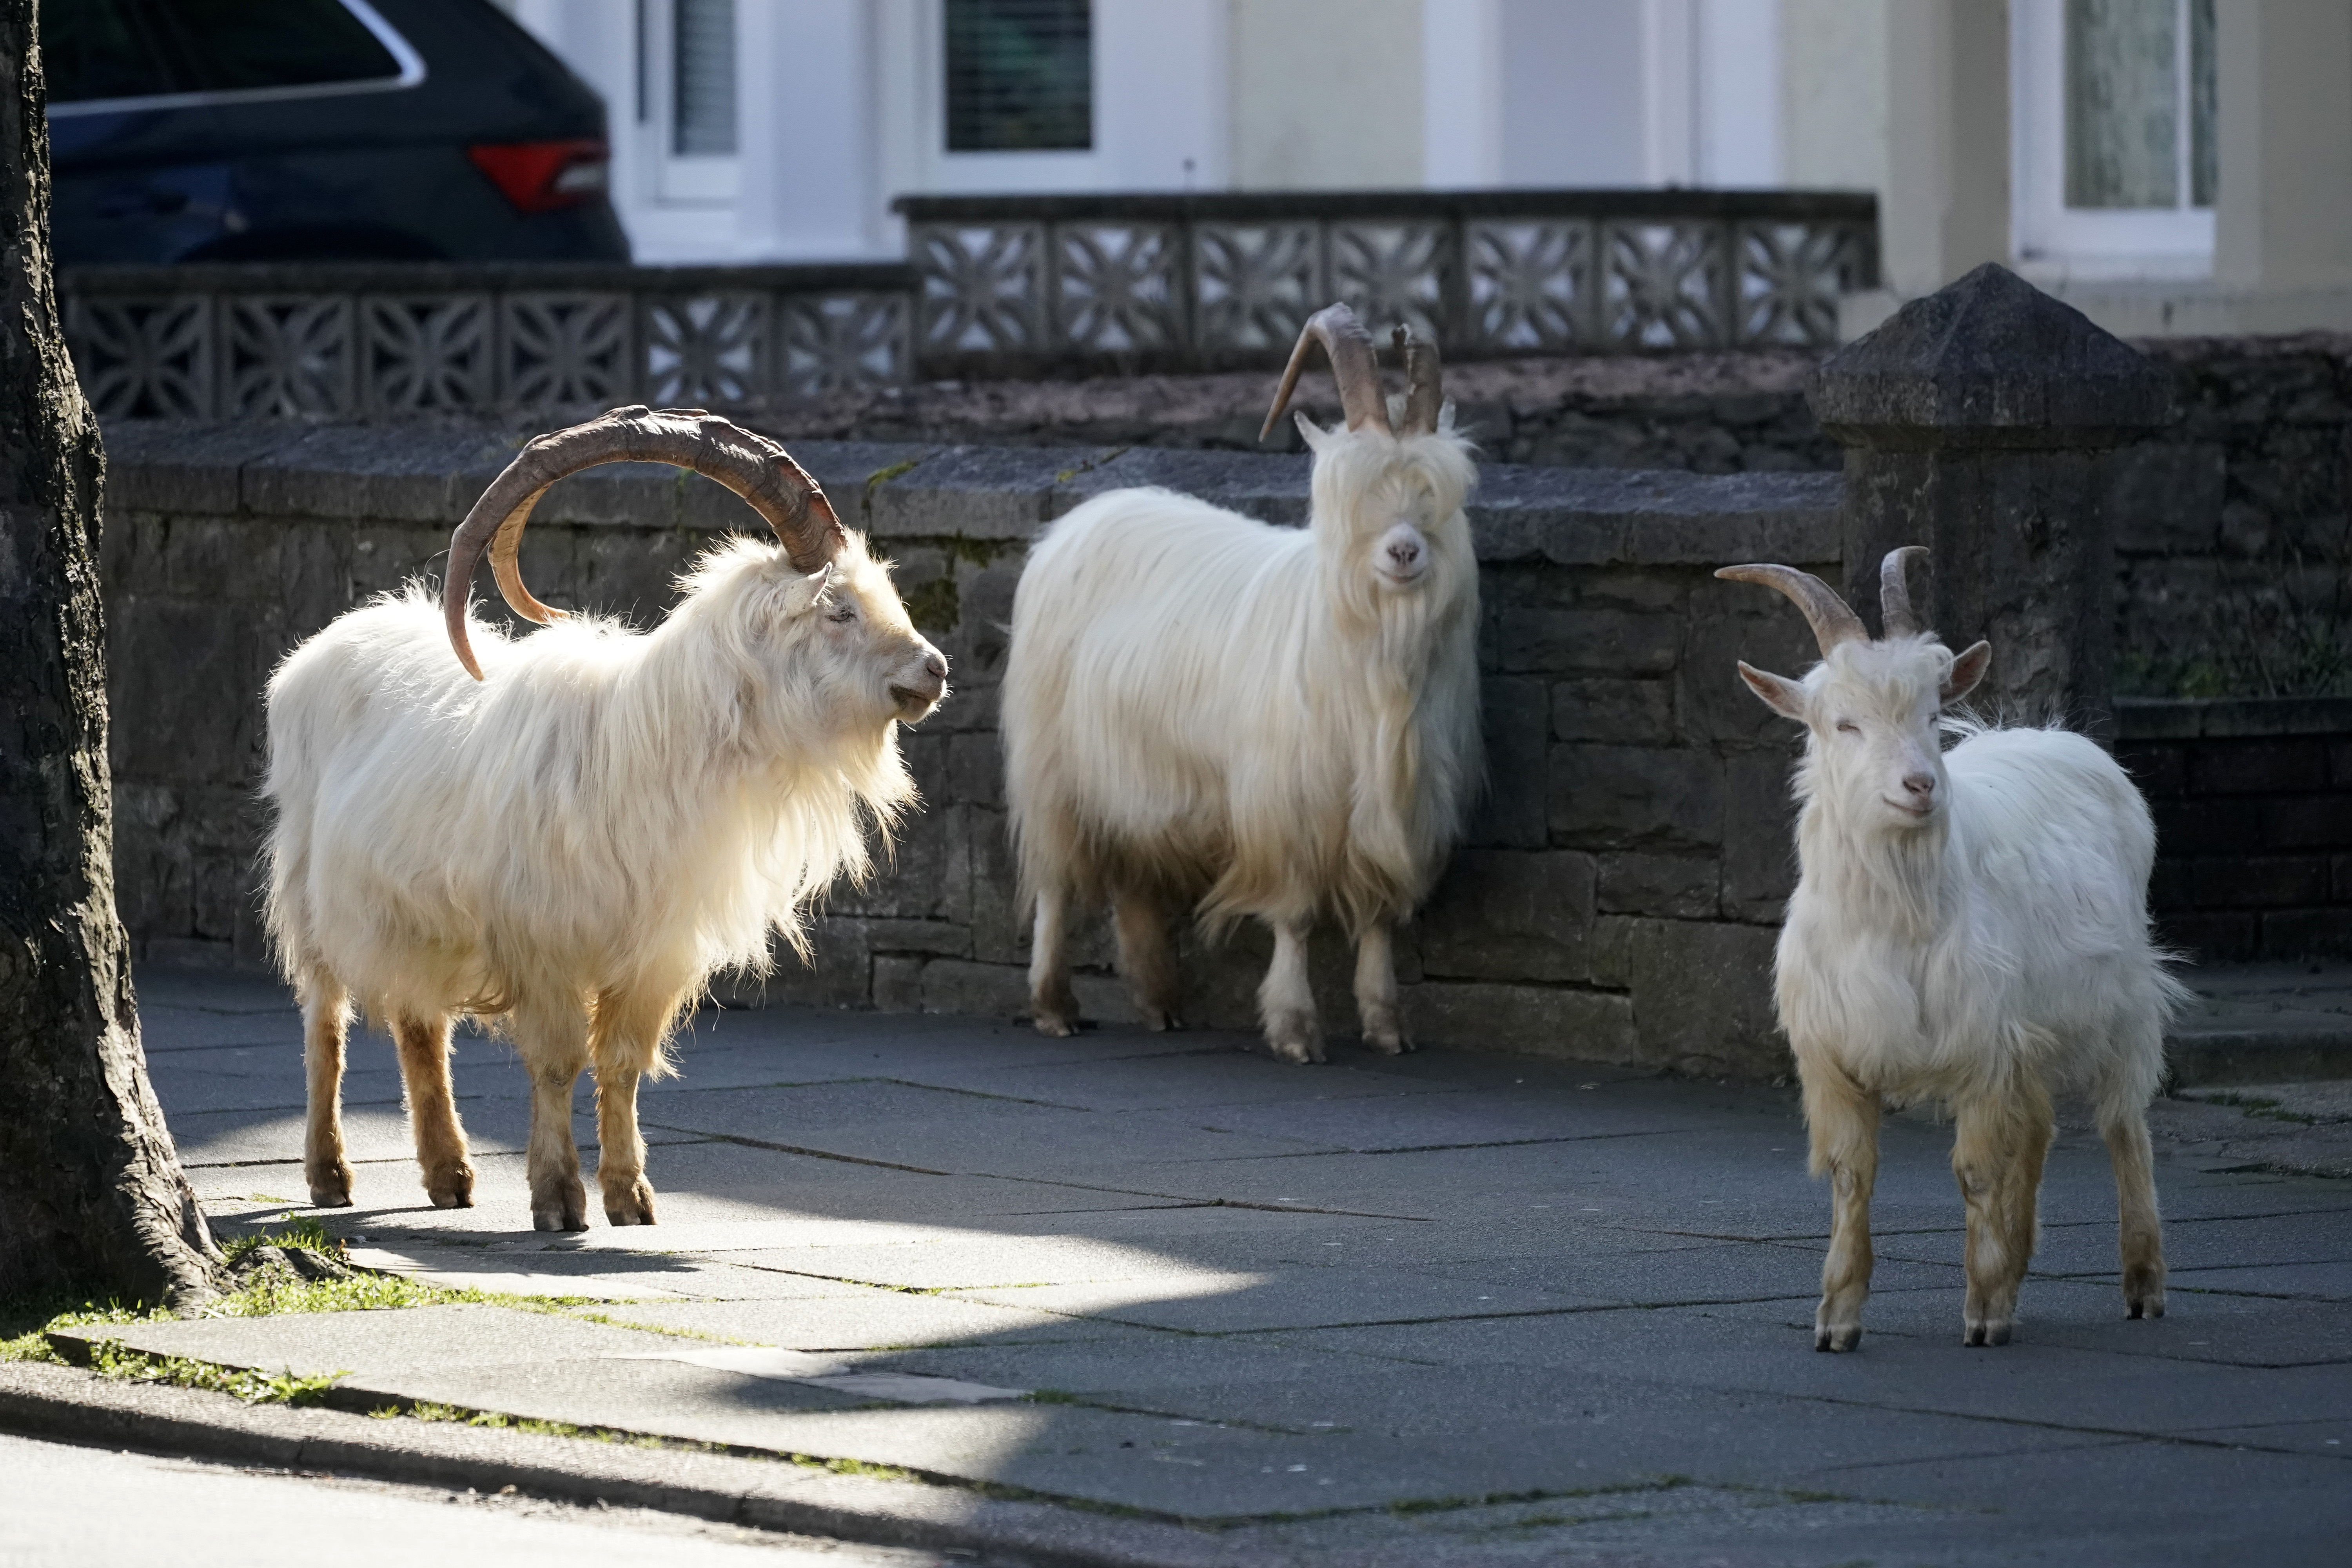 Mountain goats roam the streets of LLandudno on March 31, 2020 in Llandudno, Wales. (Photo by Christopher Furlong/Getty Images)